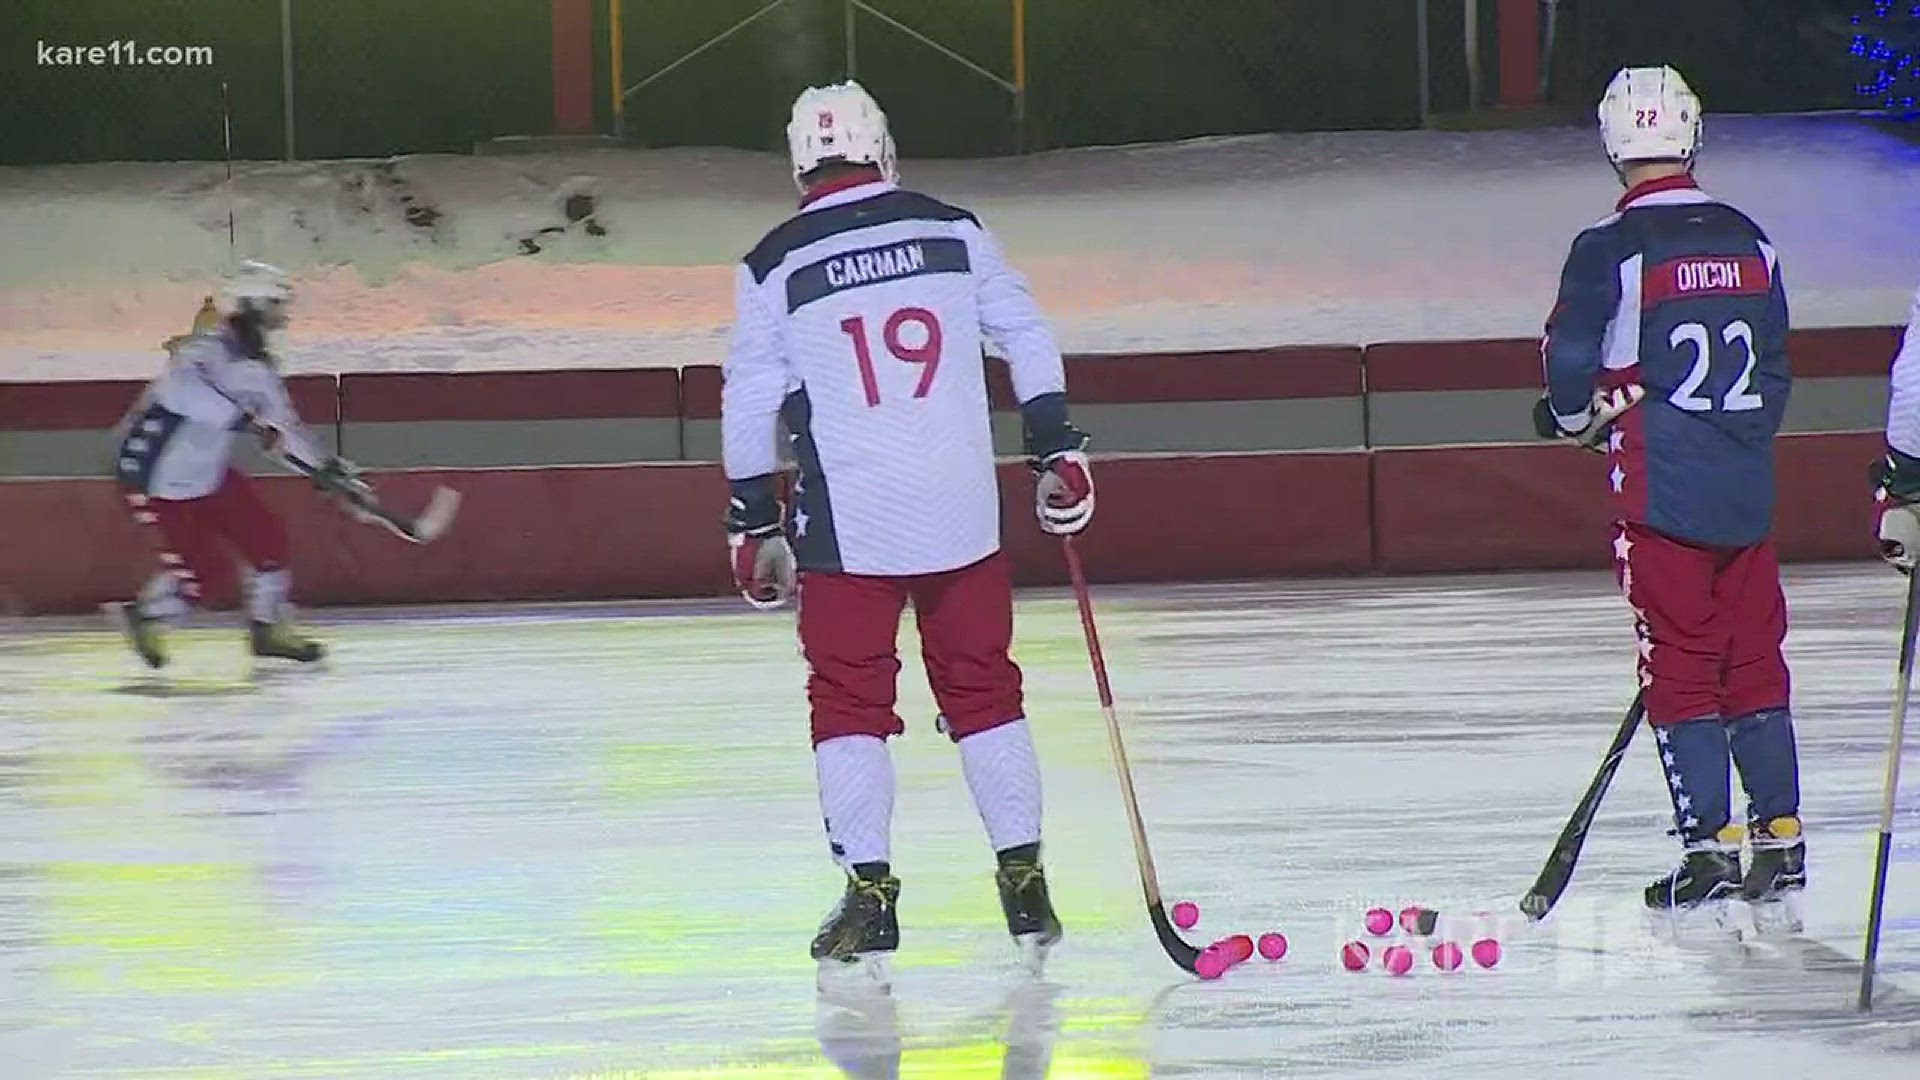 You will not see the sport in the Olympics but Bandy is alive and well in Minnesota. Players hope it will someday be in the winter games. http://kare11.tv/2EBIzPj